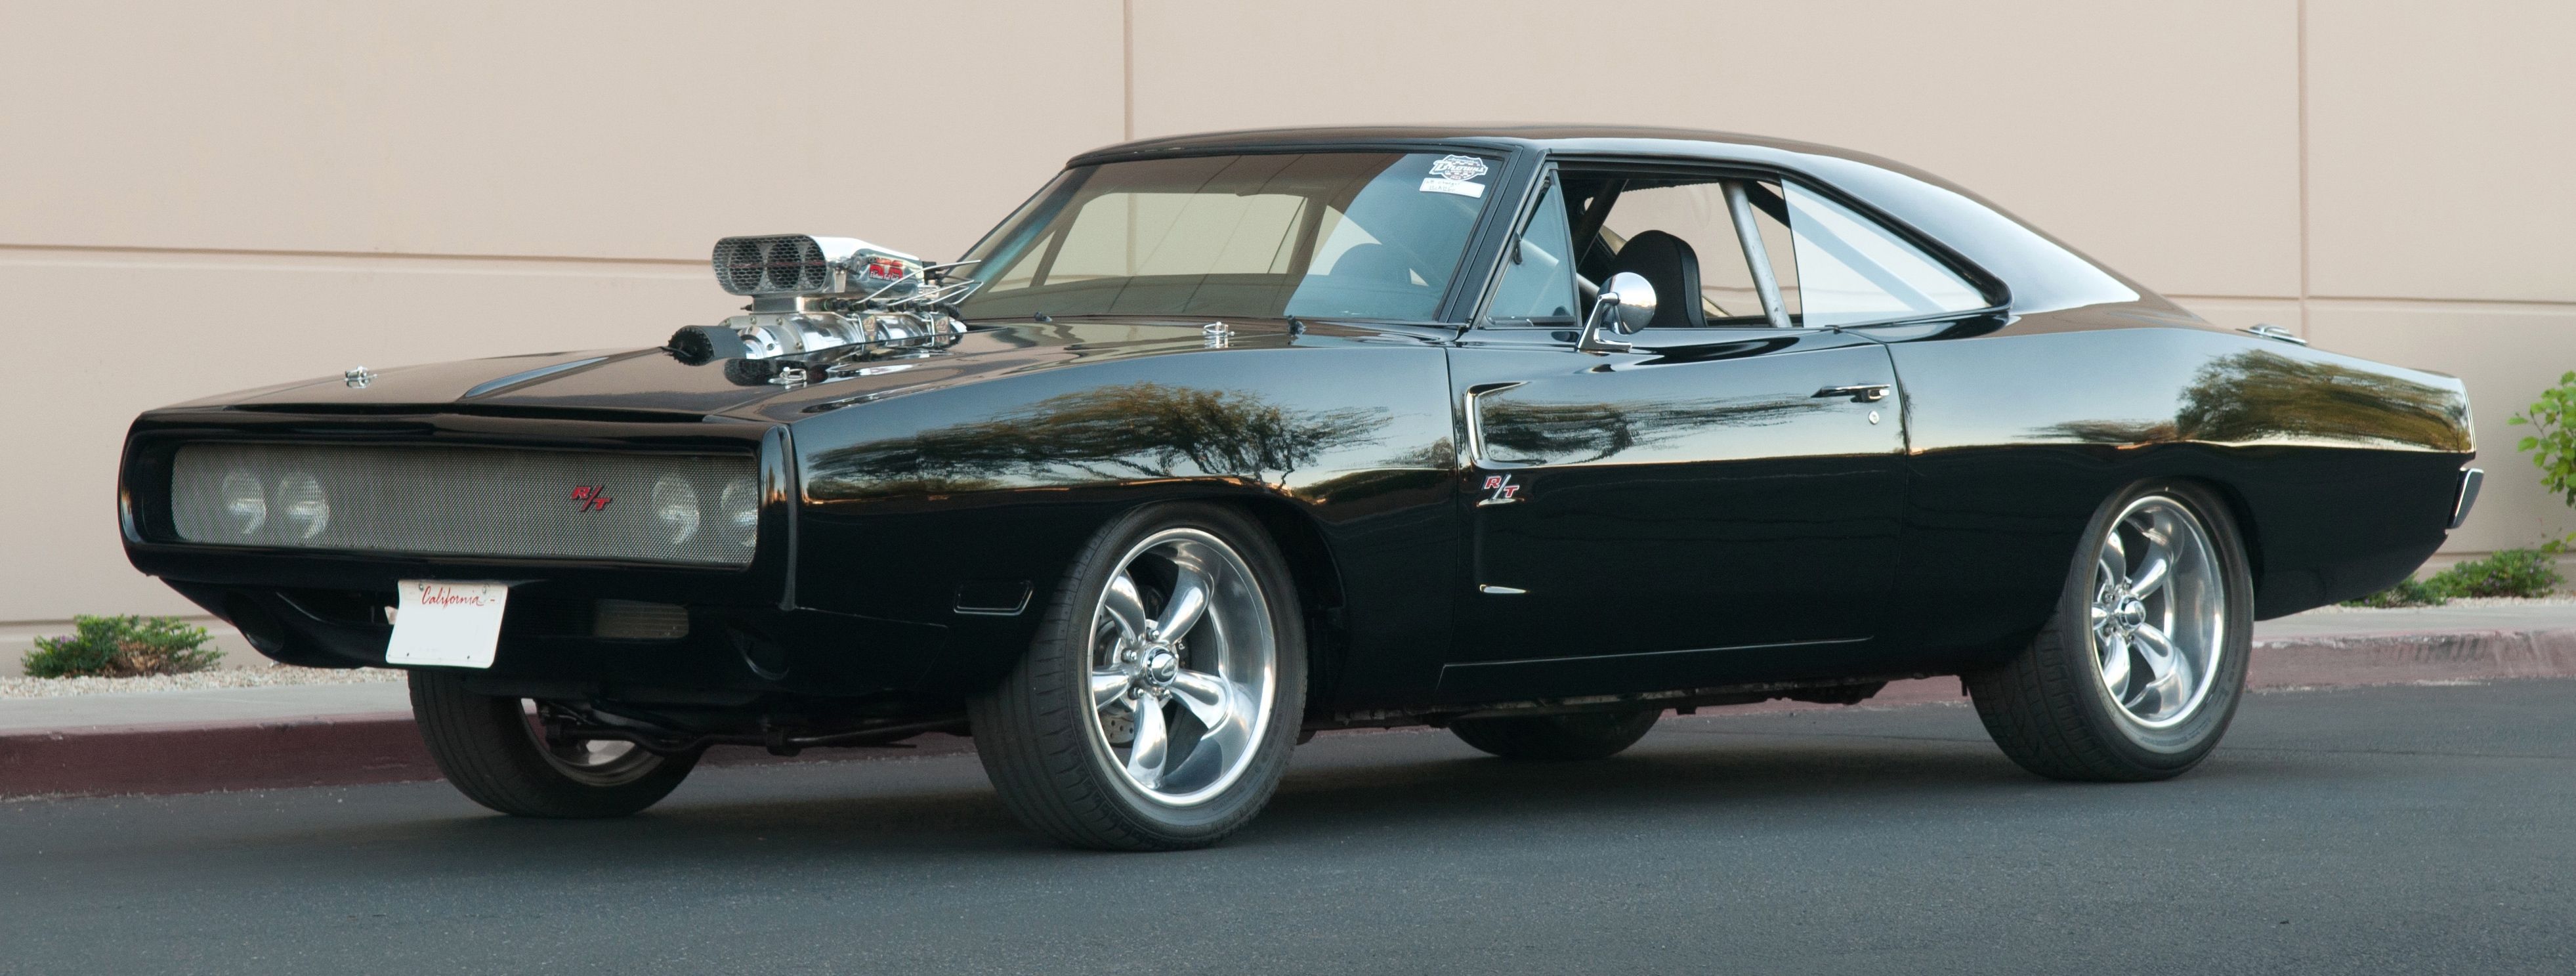 Fast and Furious' films feature familiar classic cars '. Dodge charger, 1969 dodge charger, Dodge charger rt